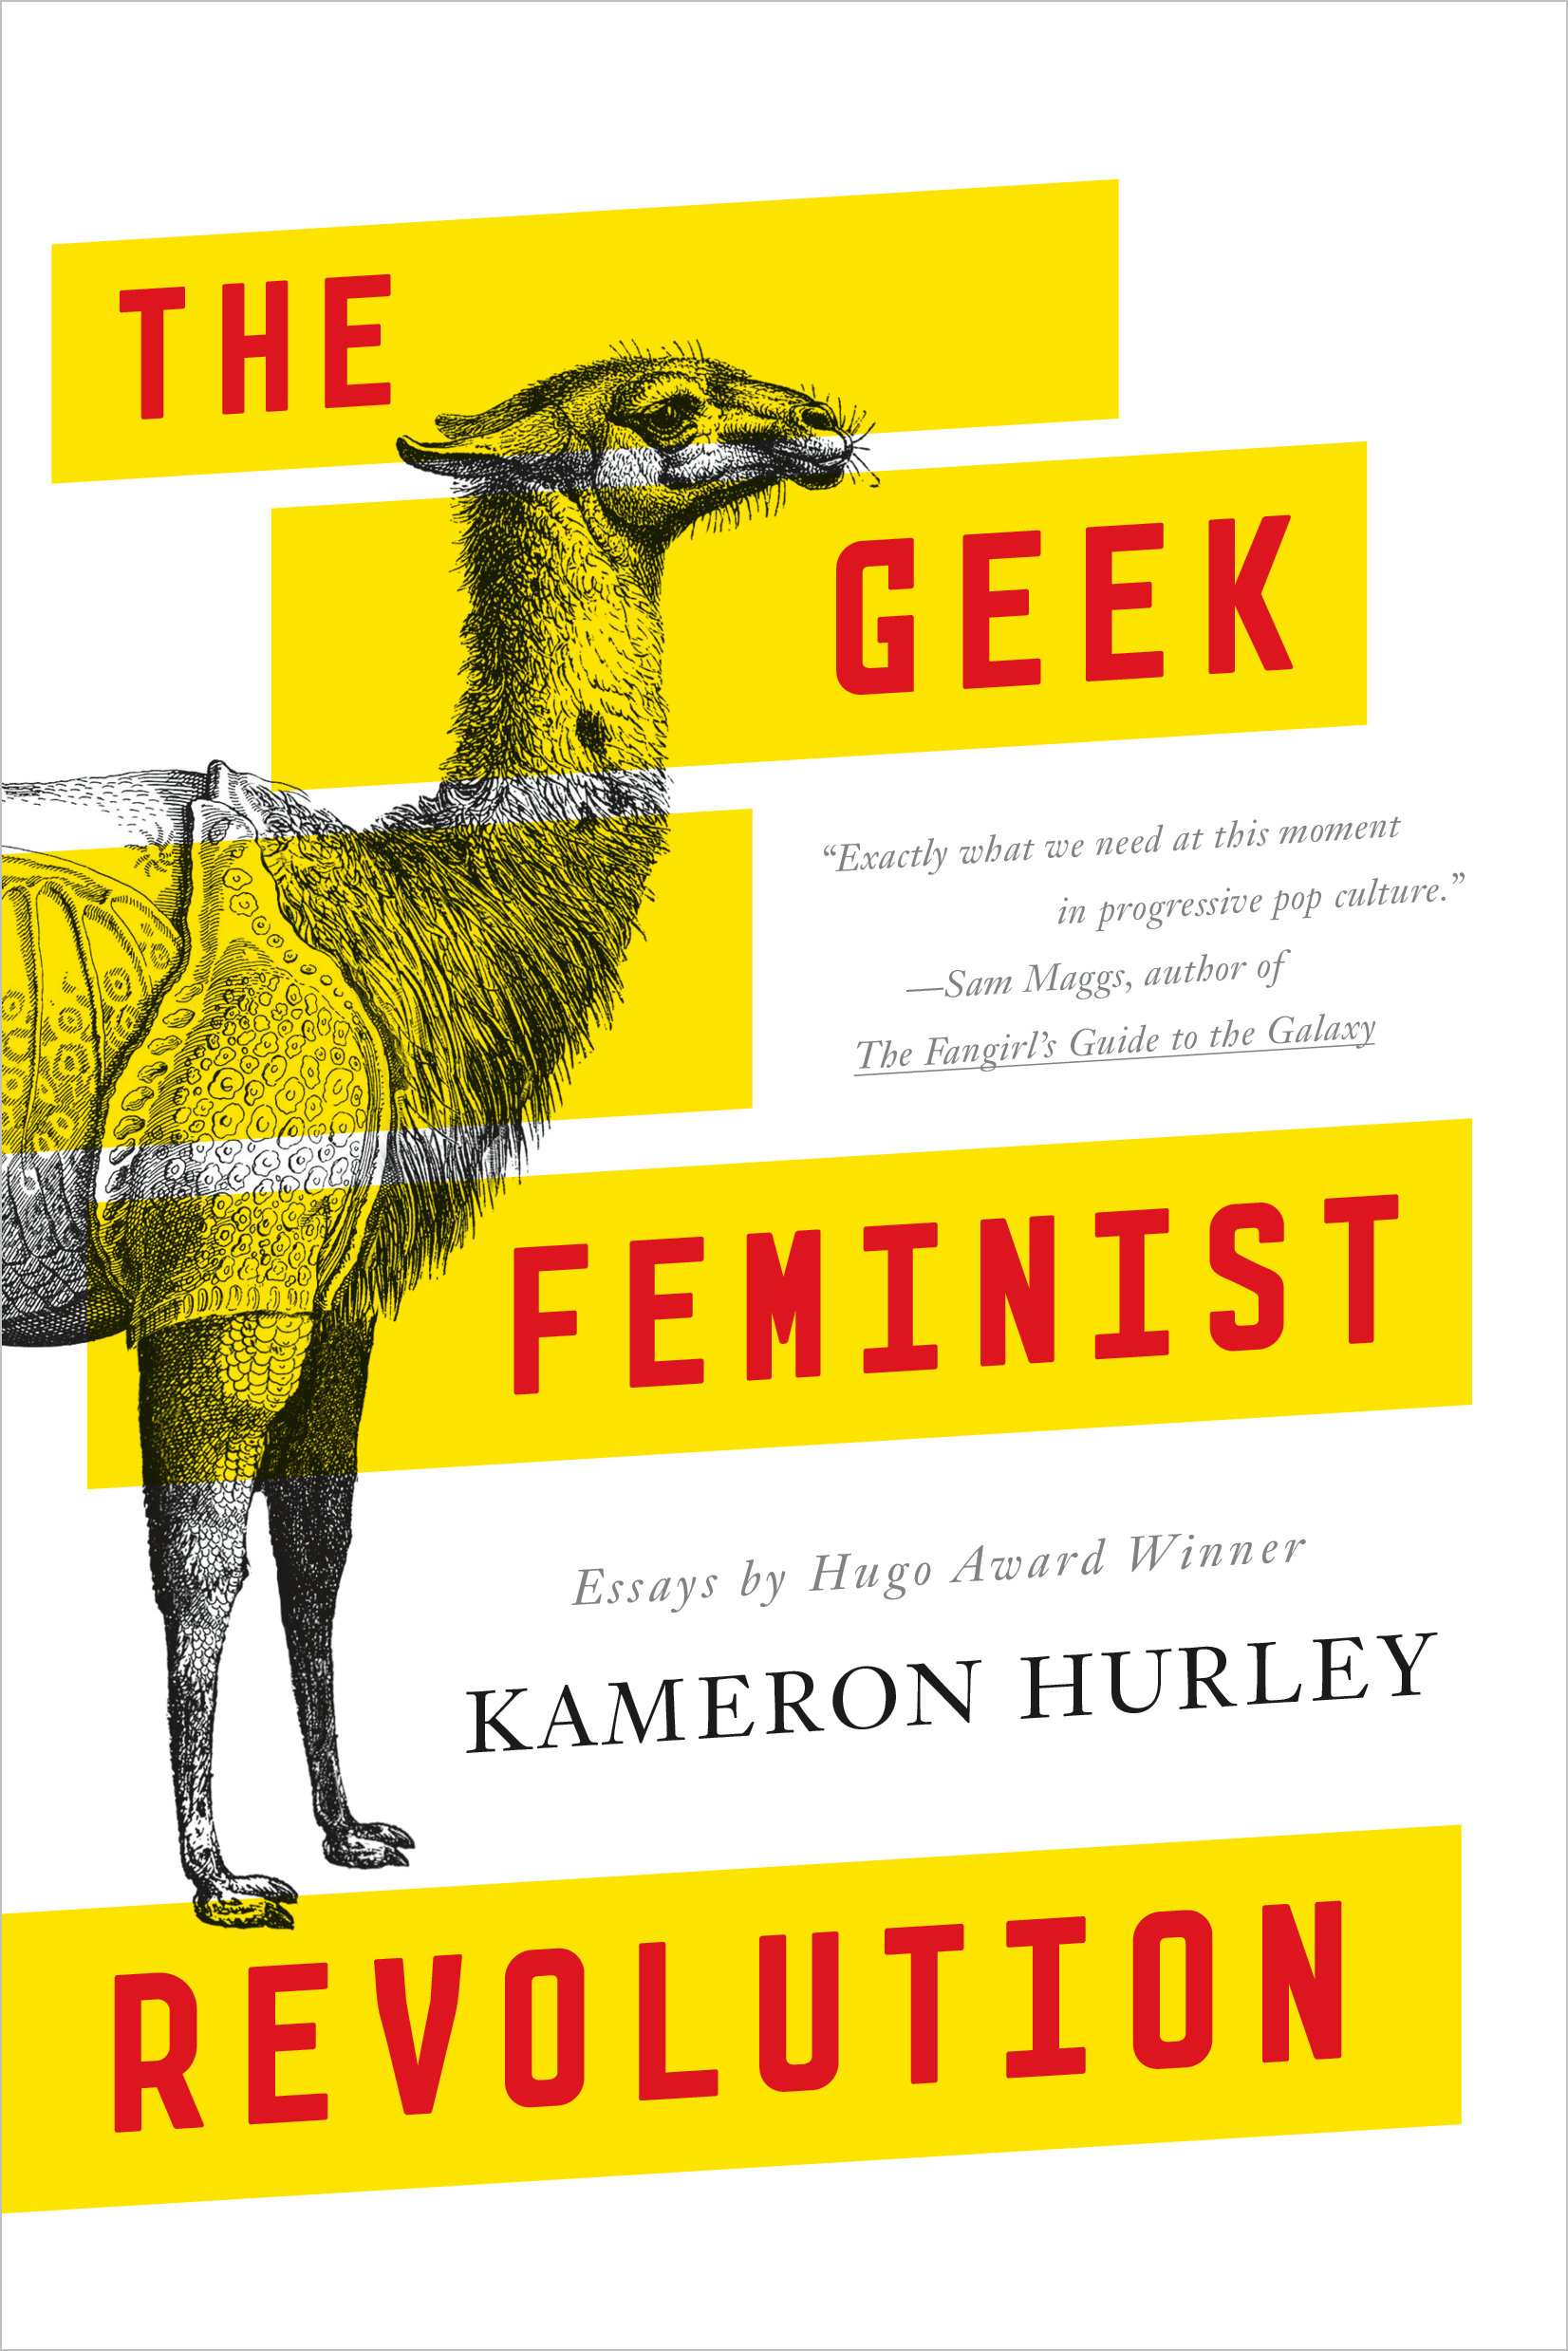 The Geek Feminist Revolution is An Essential Commentary For The Geek World